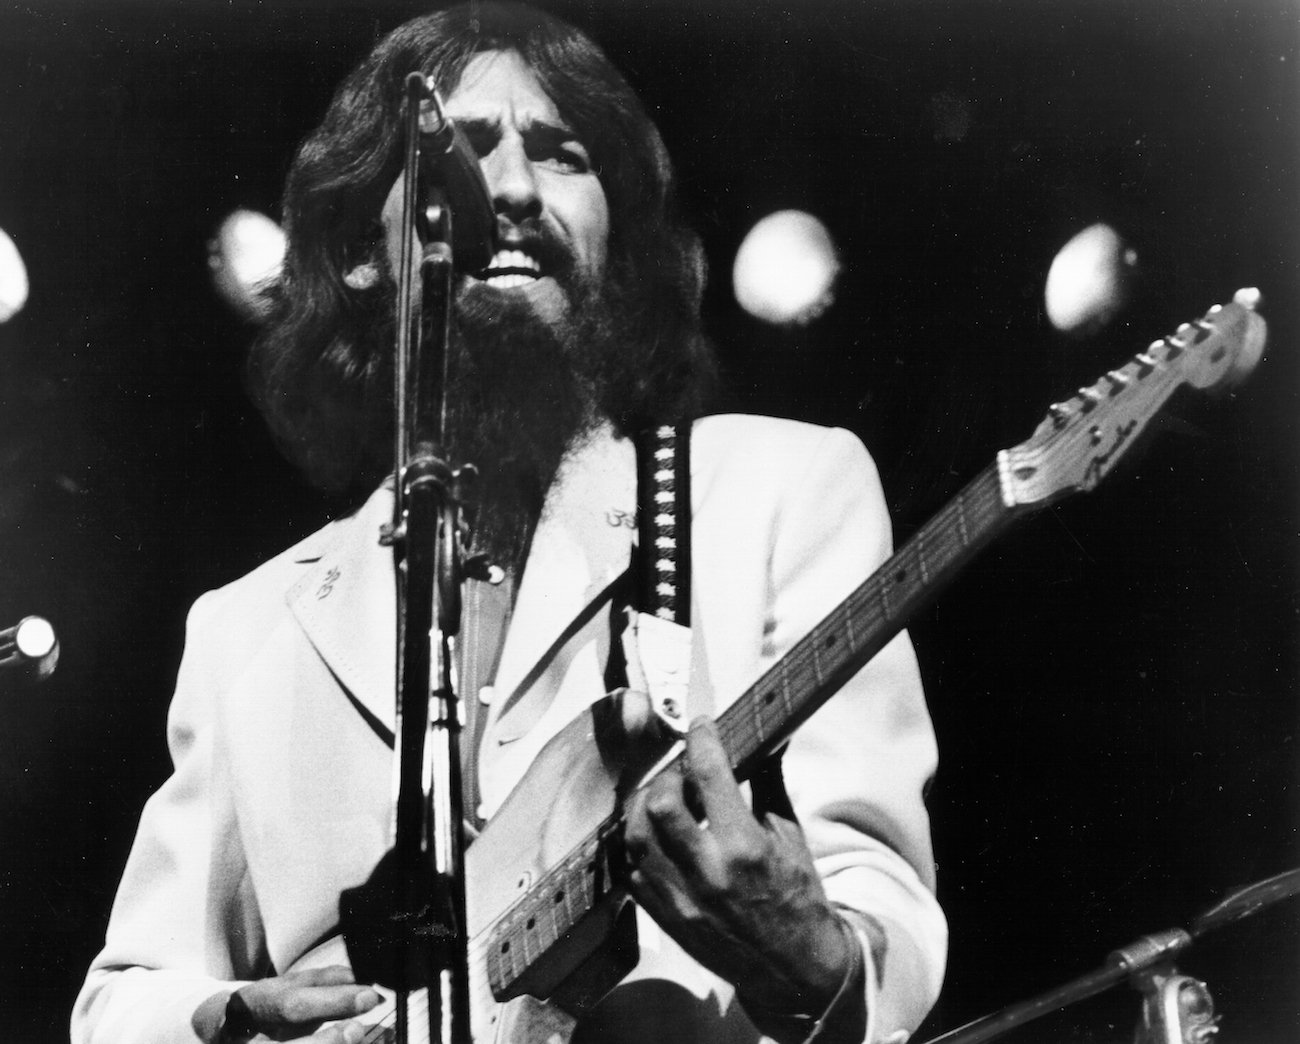 George Harrison performing at the Concert for Bangladesh.